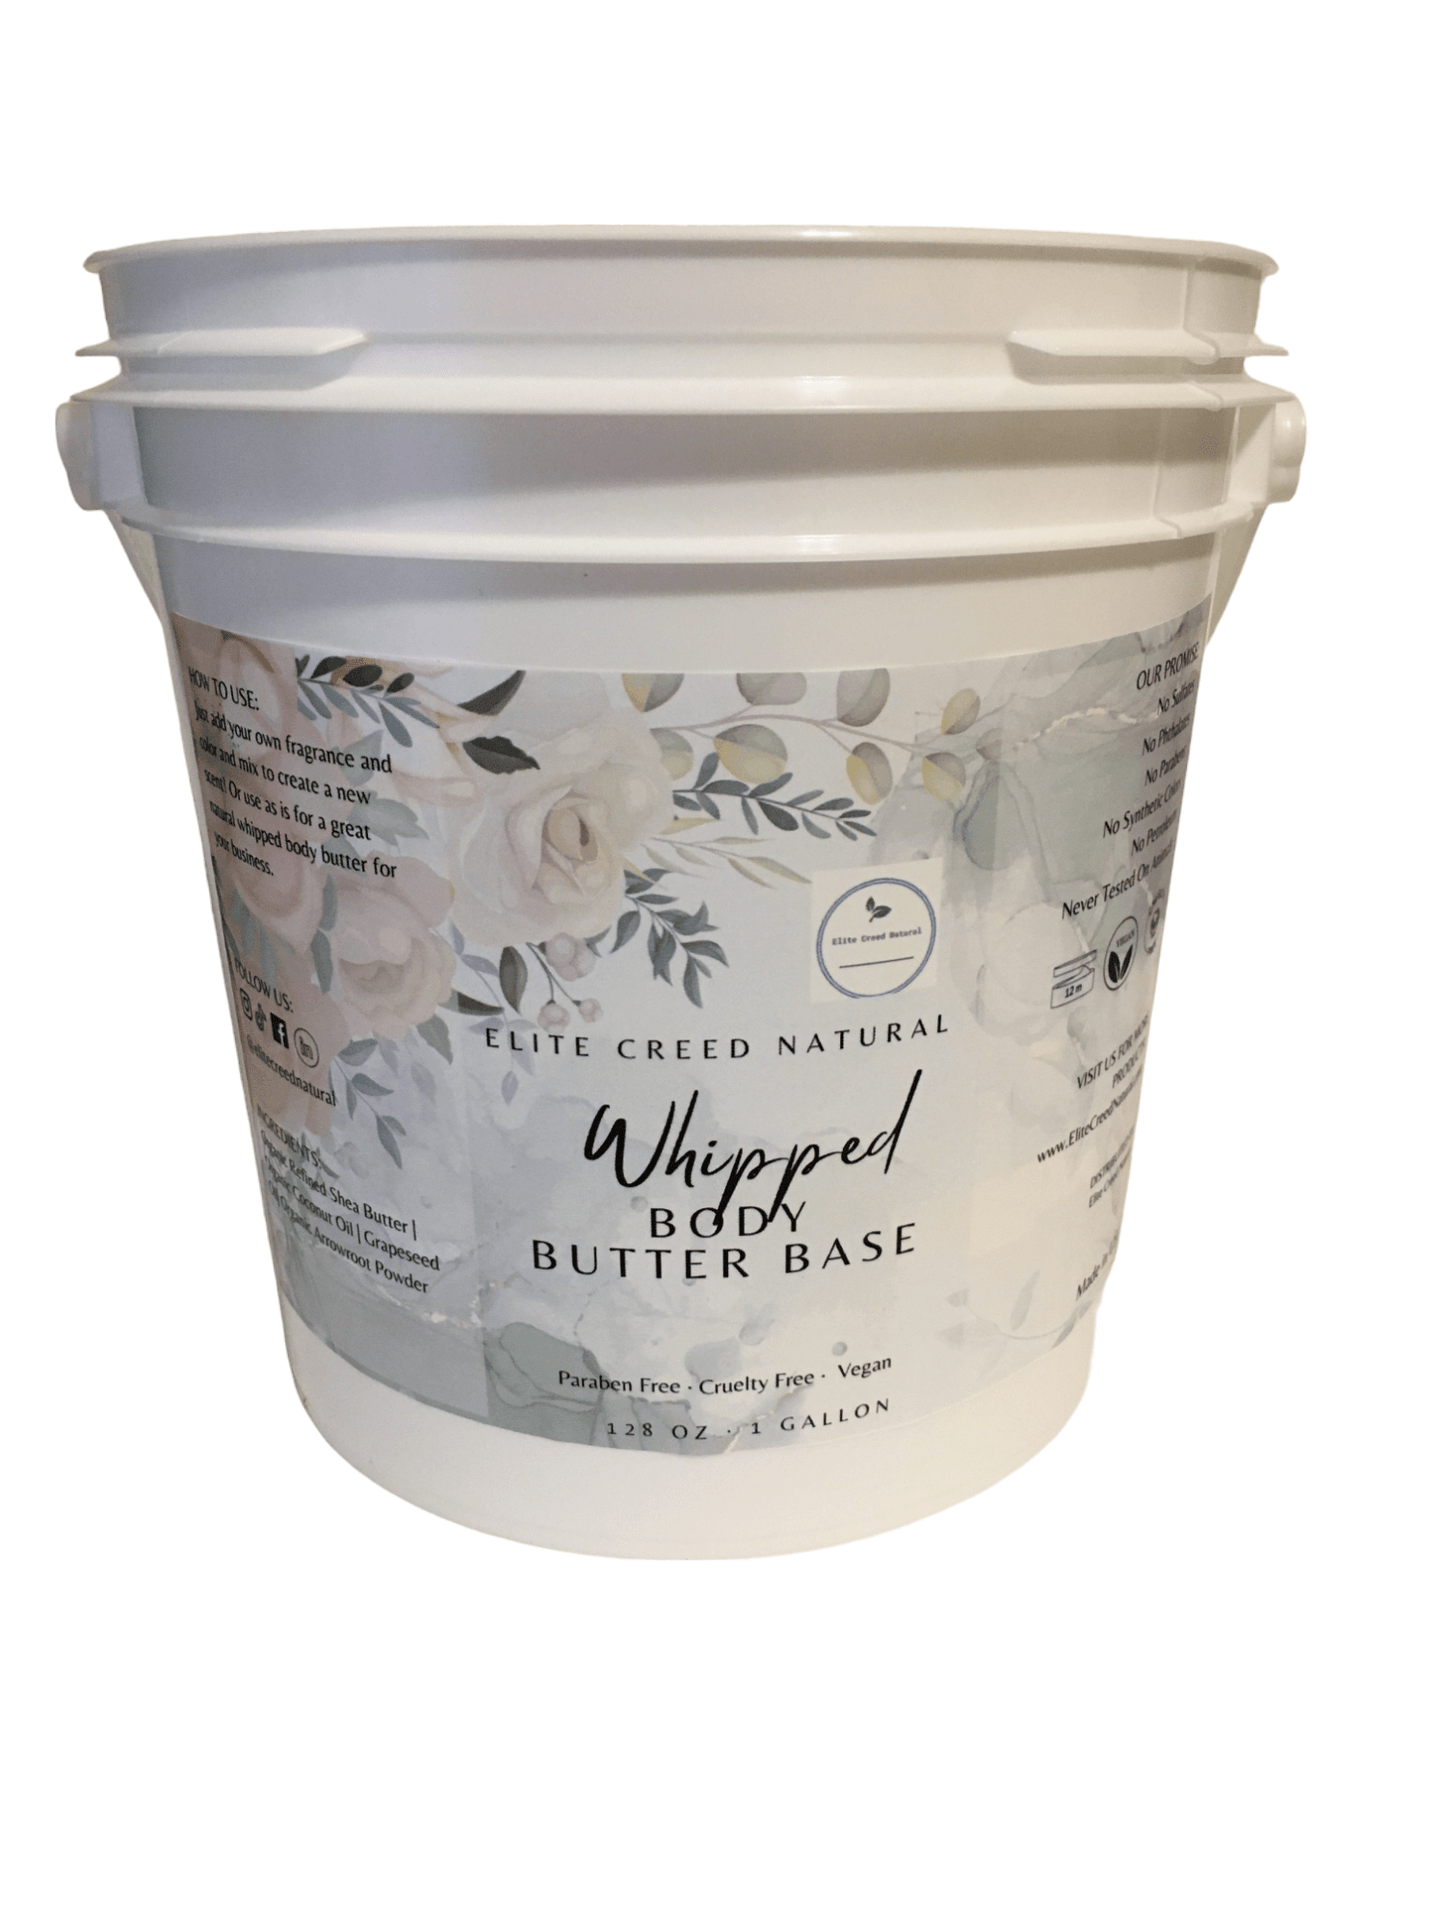 Custom Wholesale Whipped Body Butter Elite Creed Natural